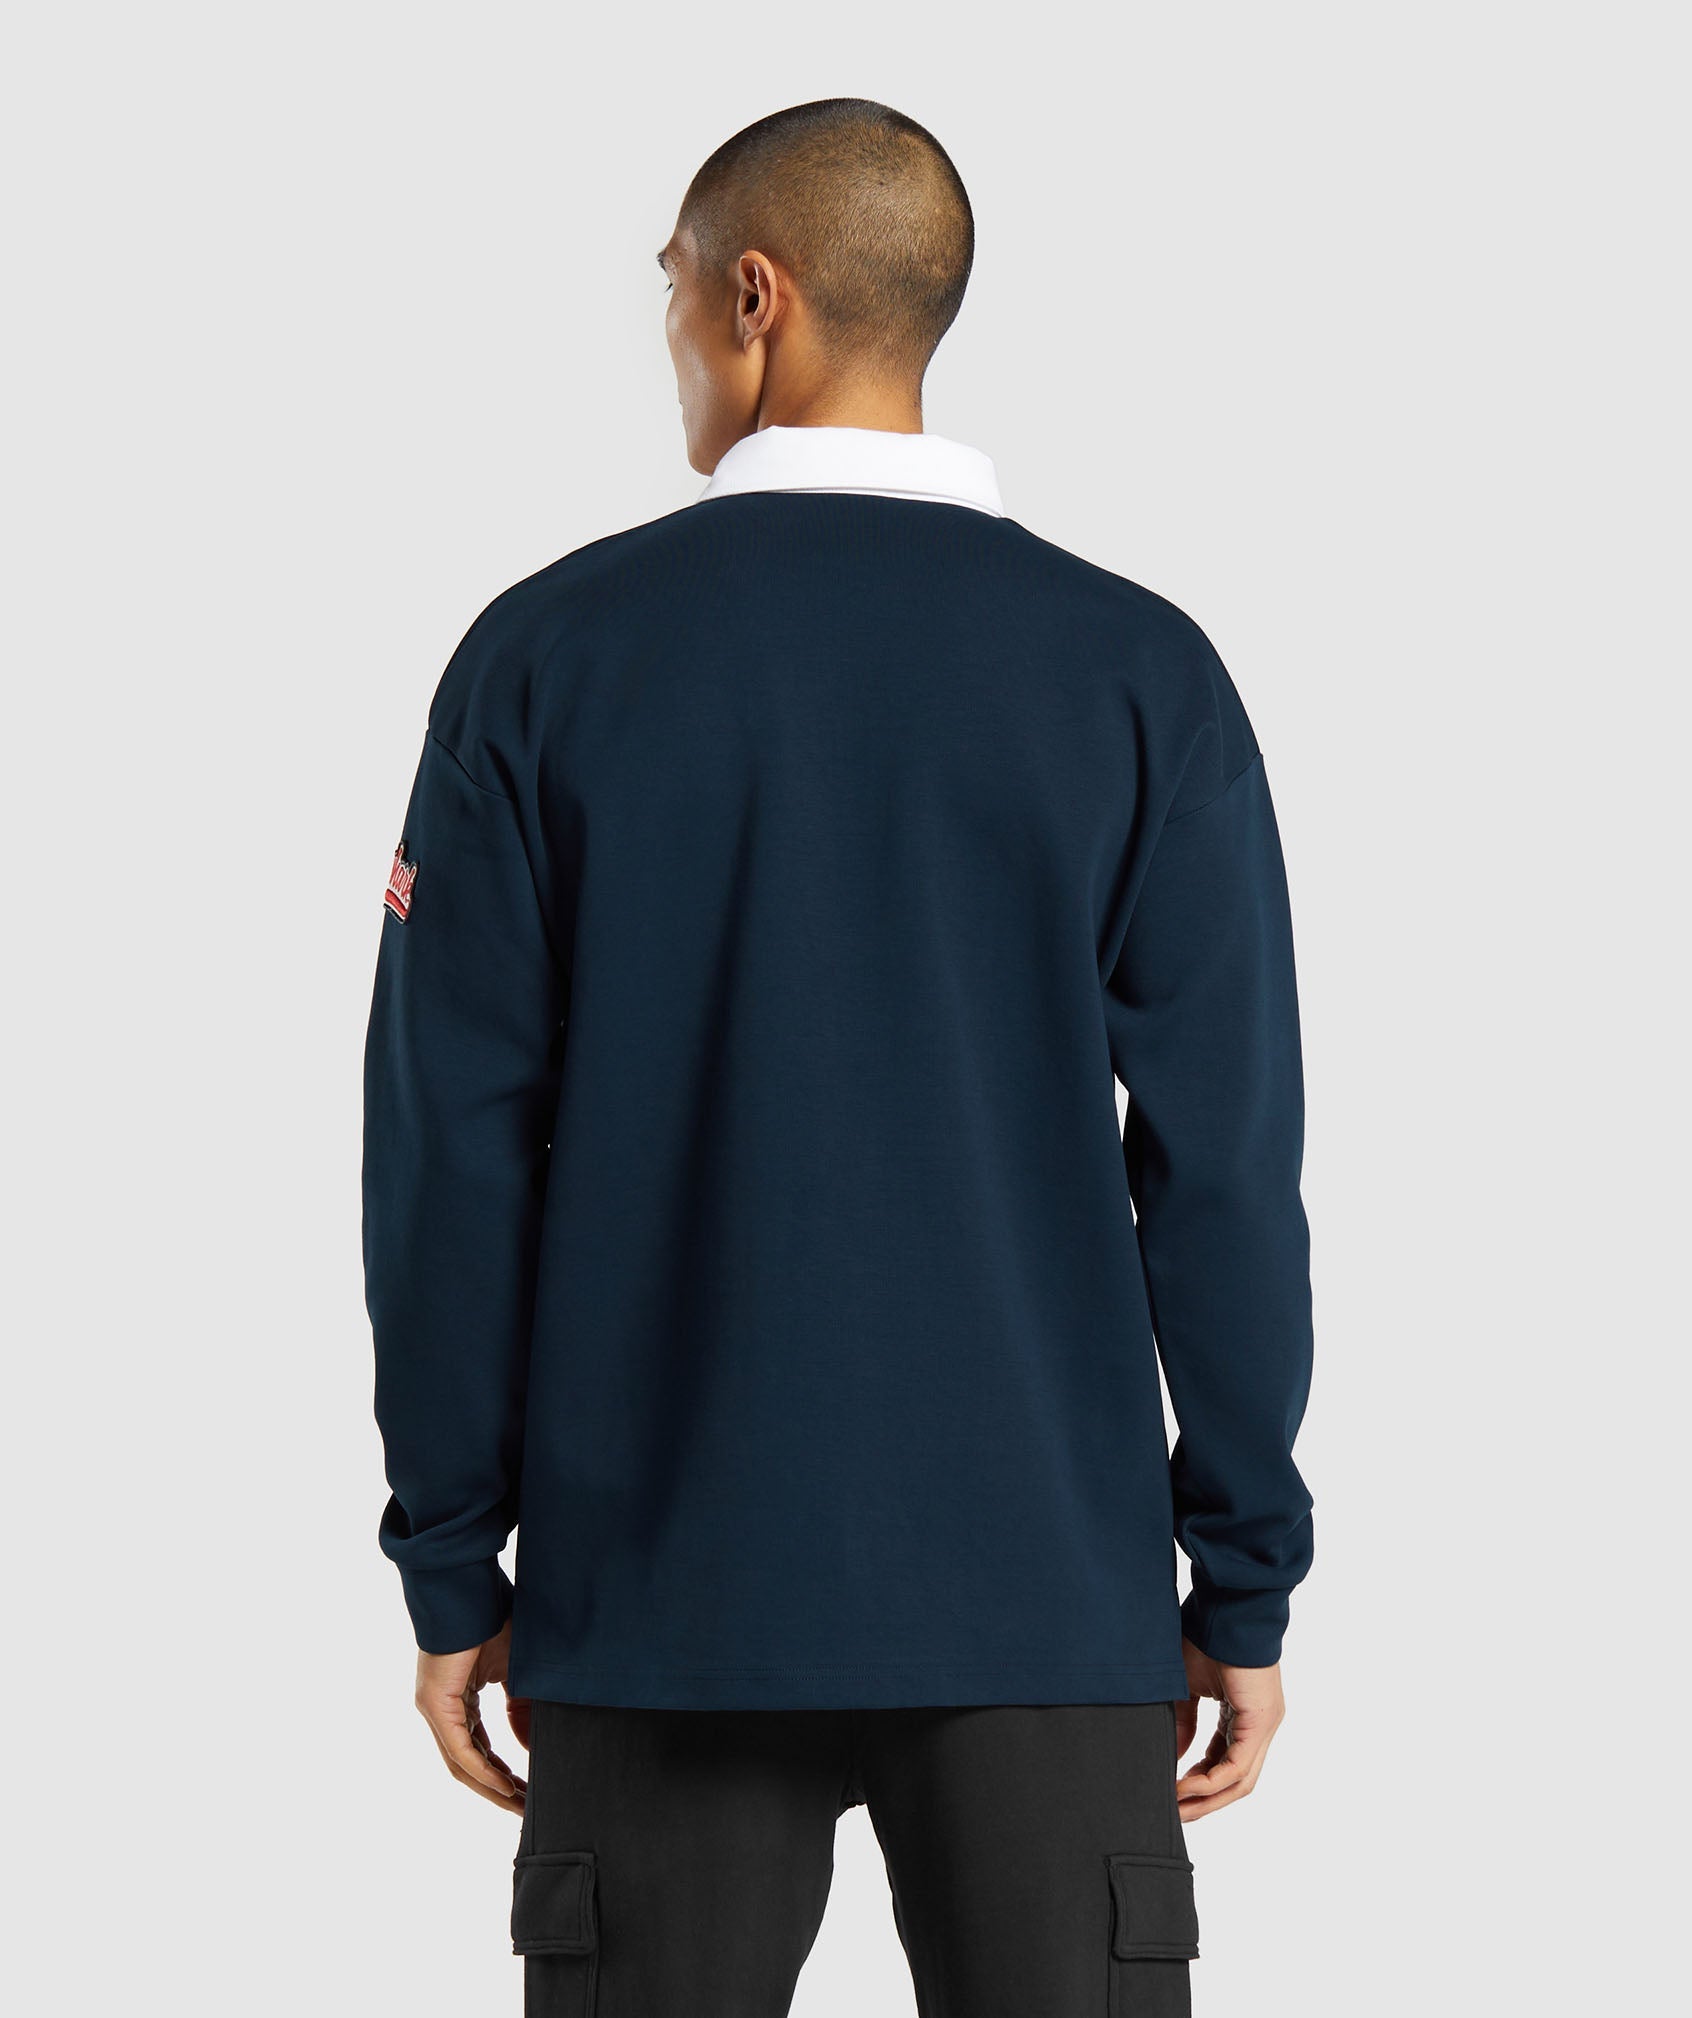 Rugby Shirt in Navy/White - view 2